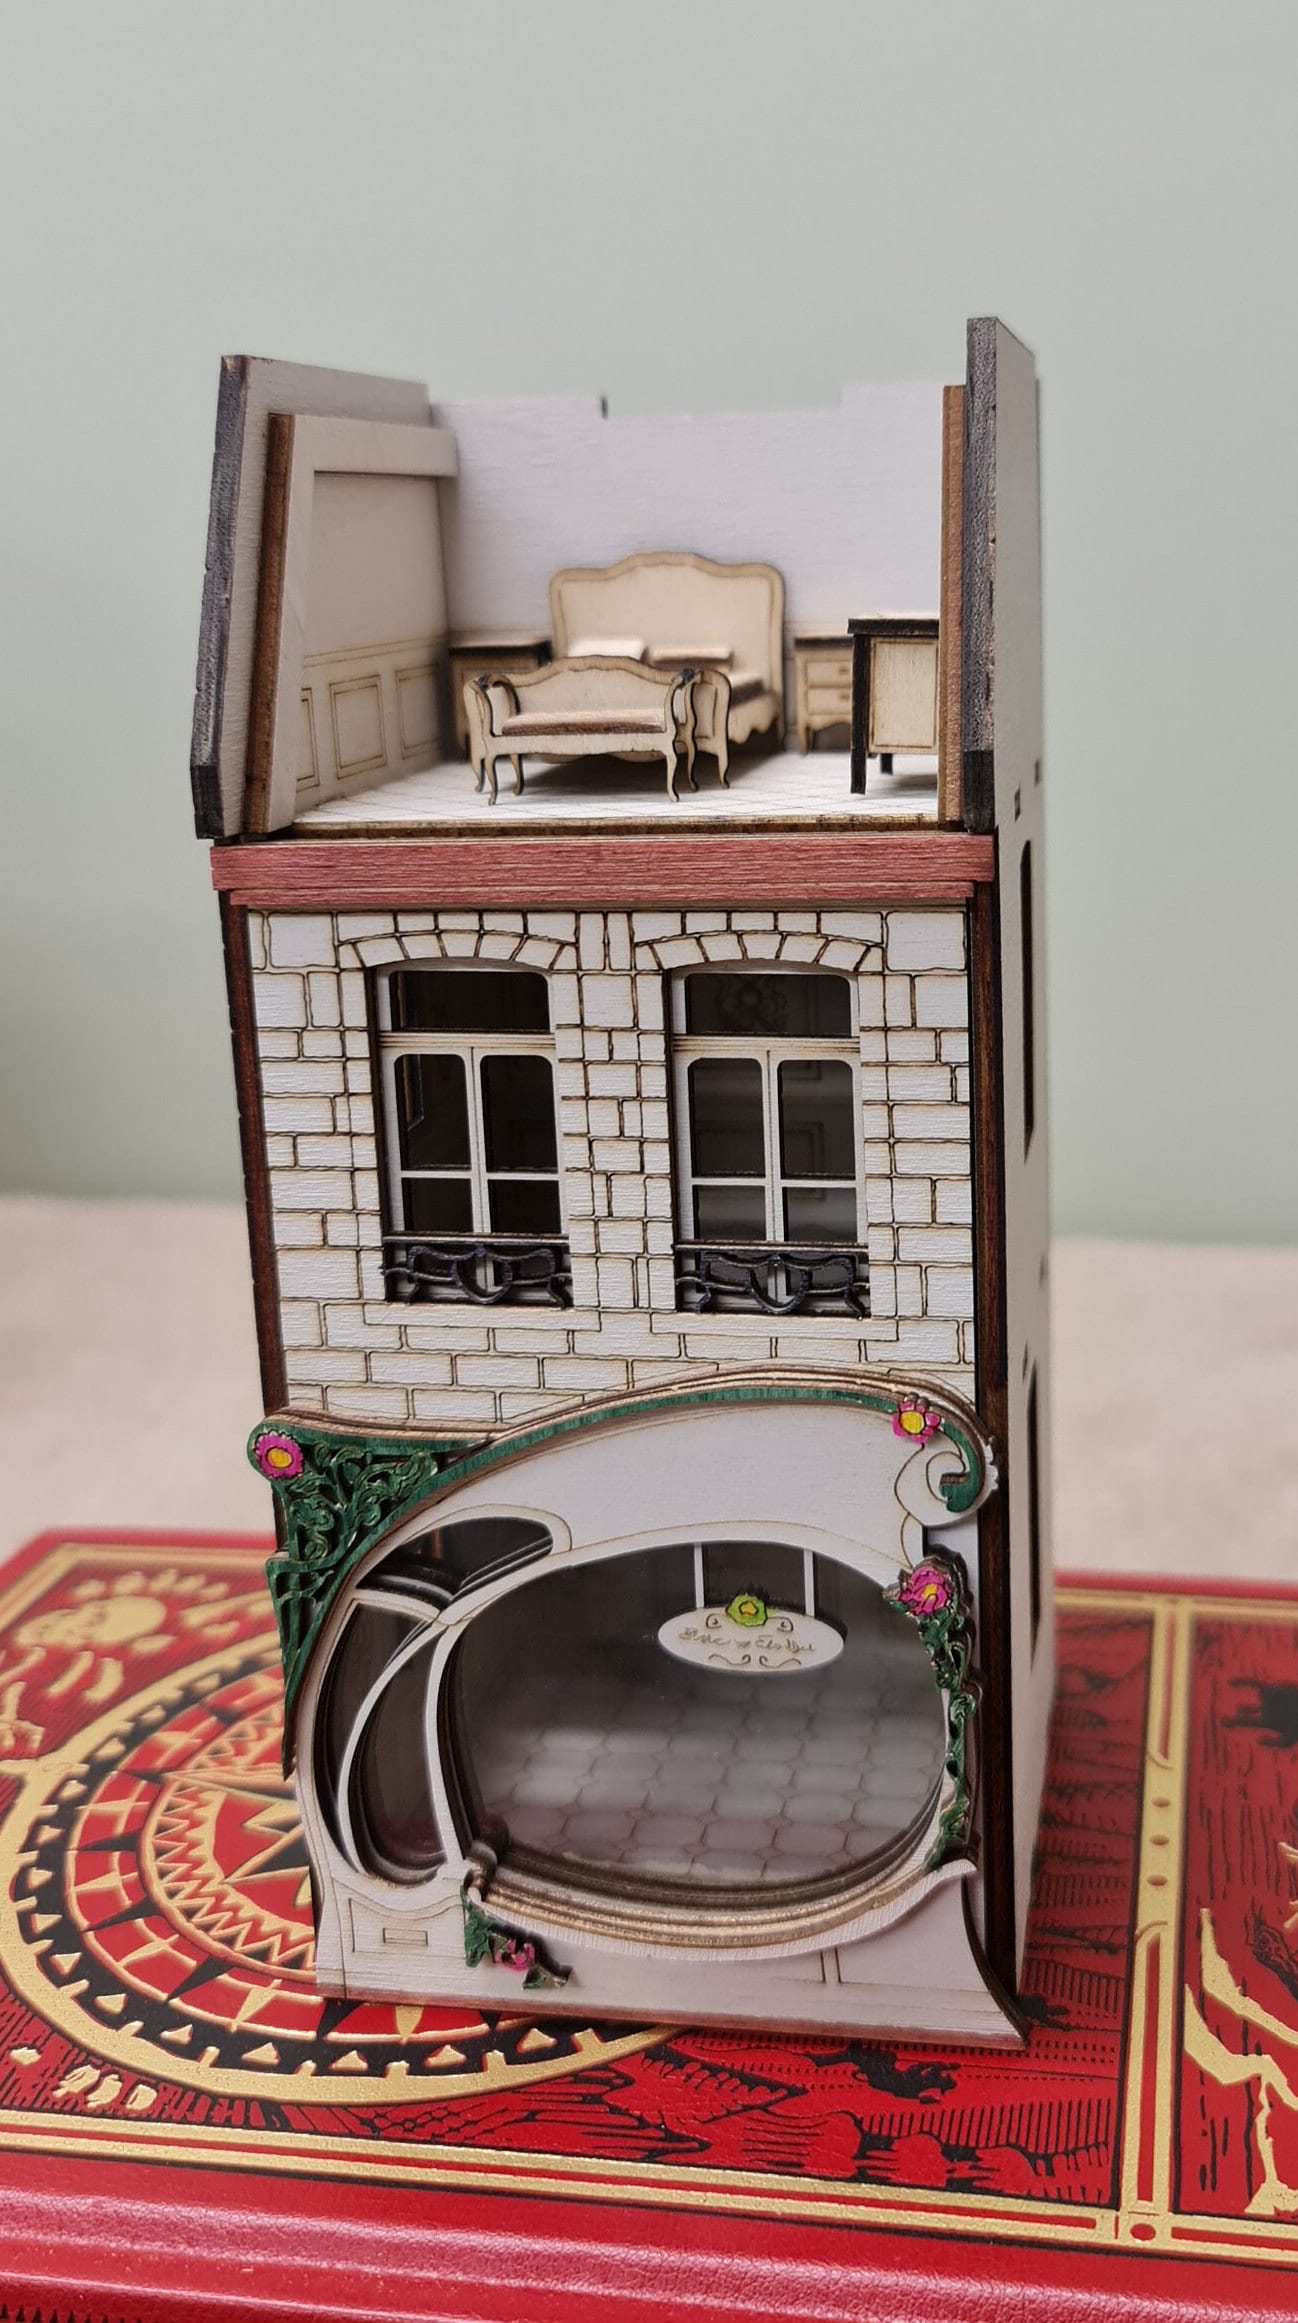 "The French Boutique", 1;24th scale